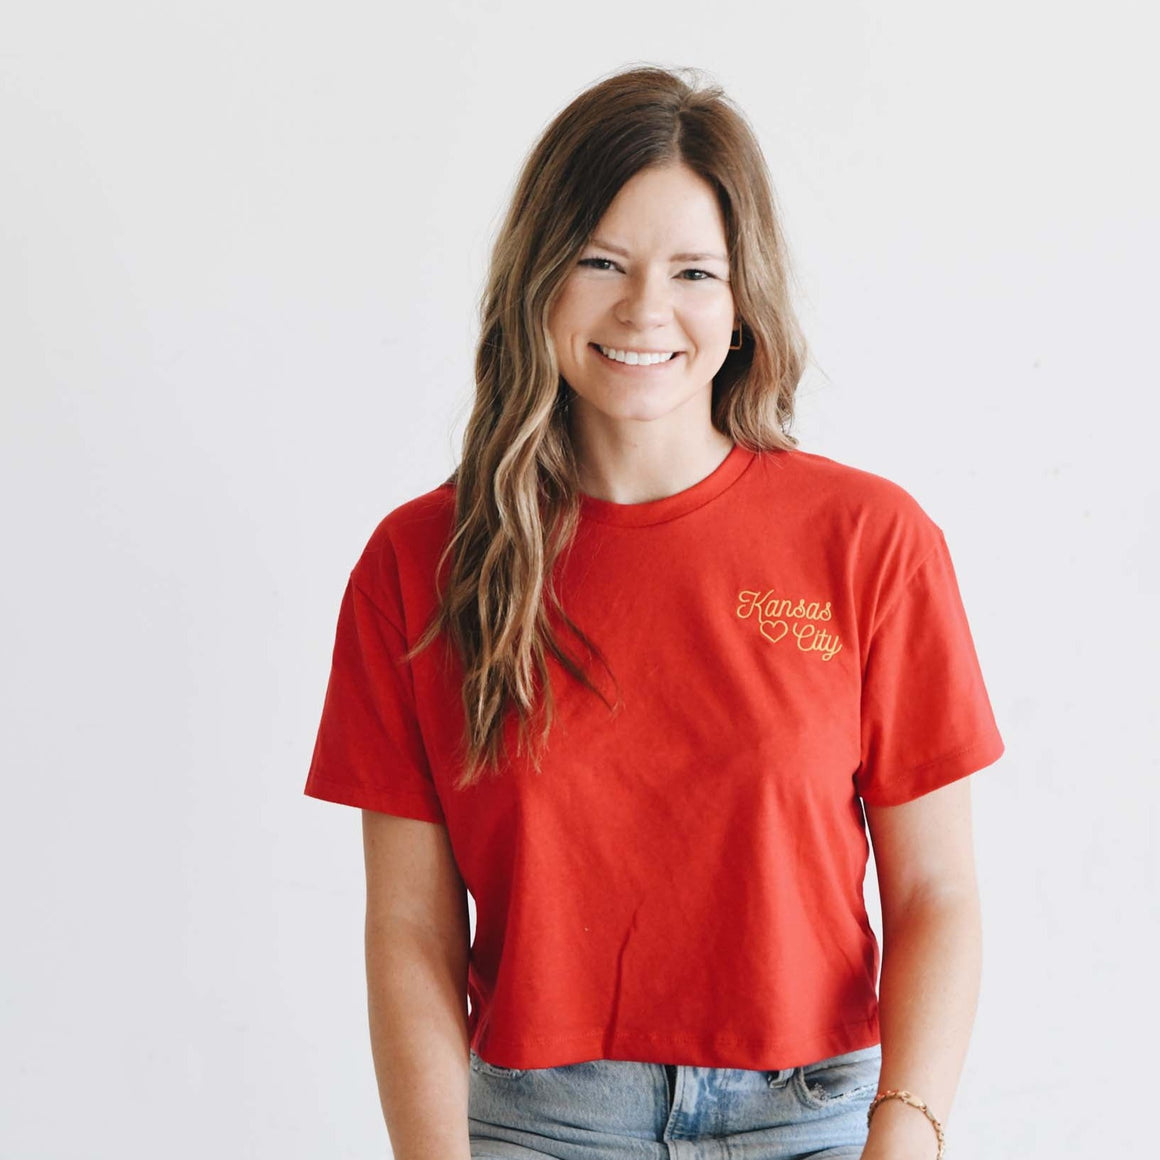 Kansas City Embroidered Cropped T-Shirt - Red